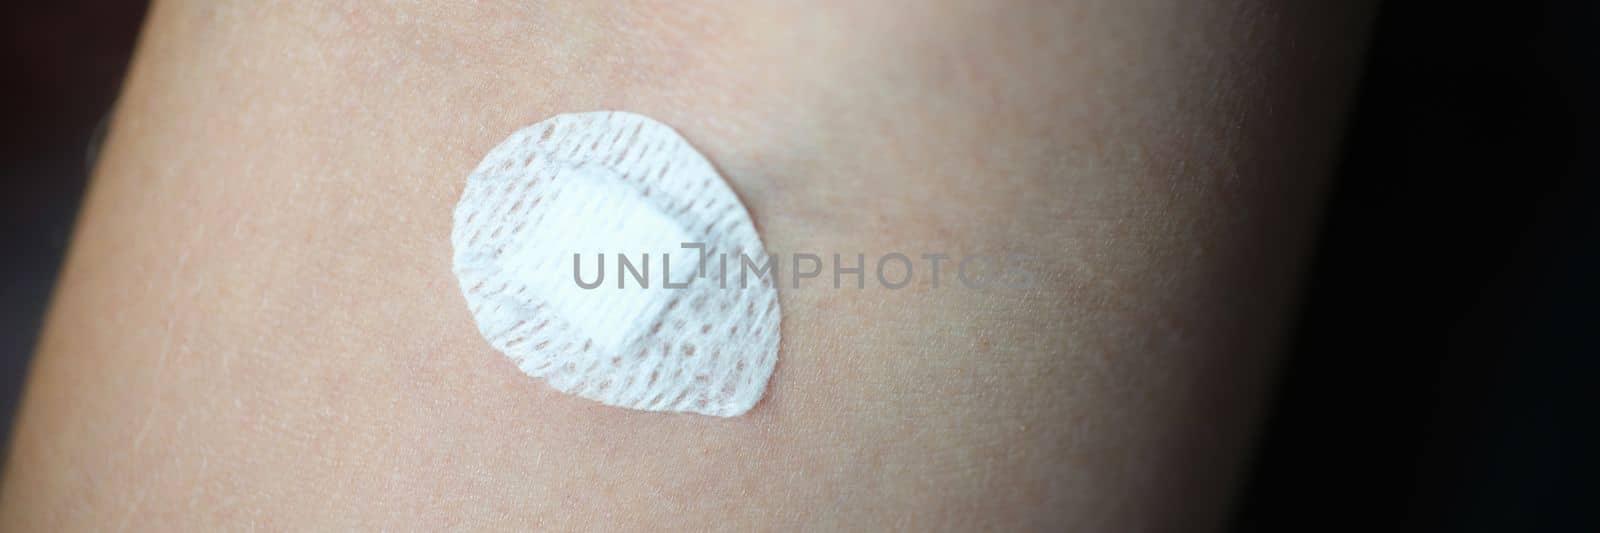 Small round patch stuck in place intravenous injection on forearm closeup. Medical laboratory blood tests concept